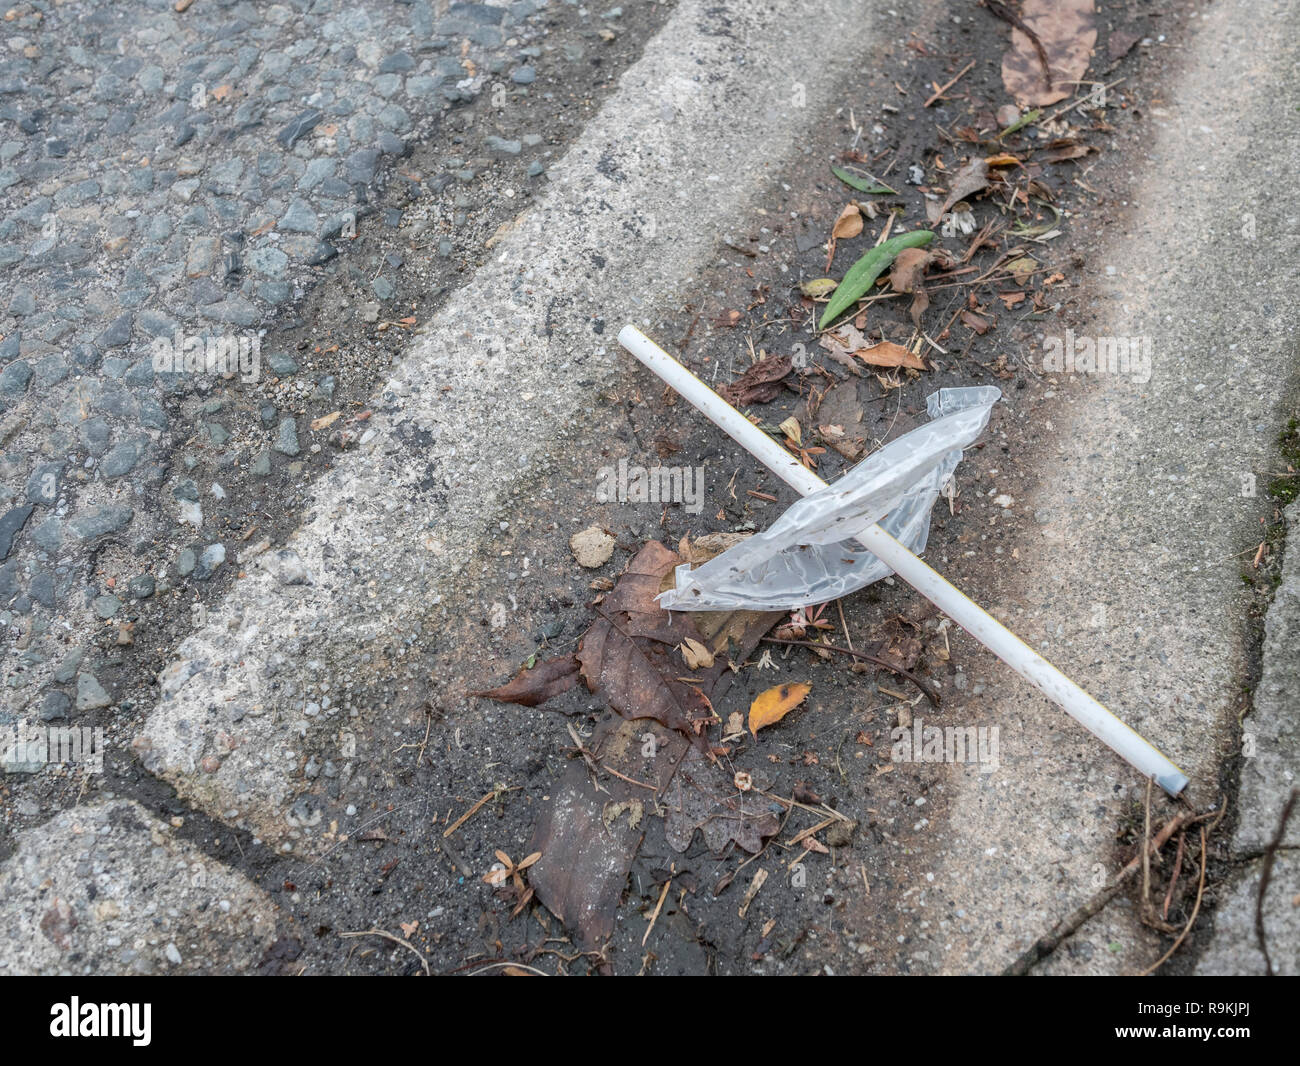 PTFE plastic soft drink cup top & plastic straw discarded in urban area. For environmental pollution, war on plastic waste, plastic straw ban. Stock Photo